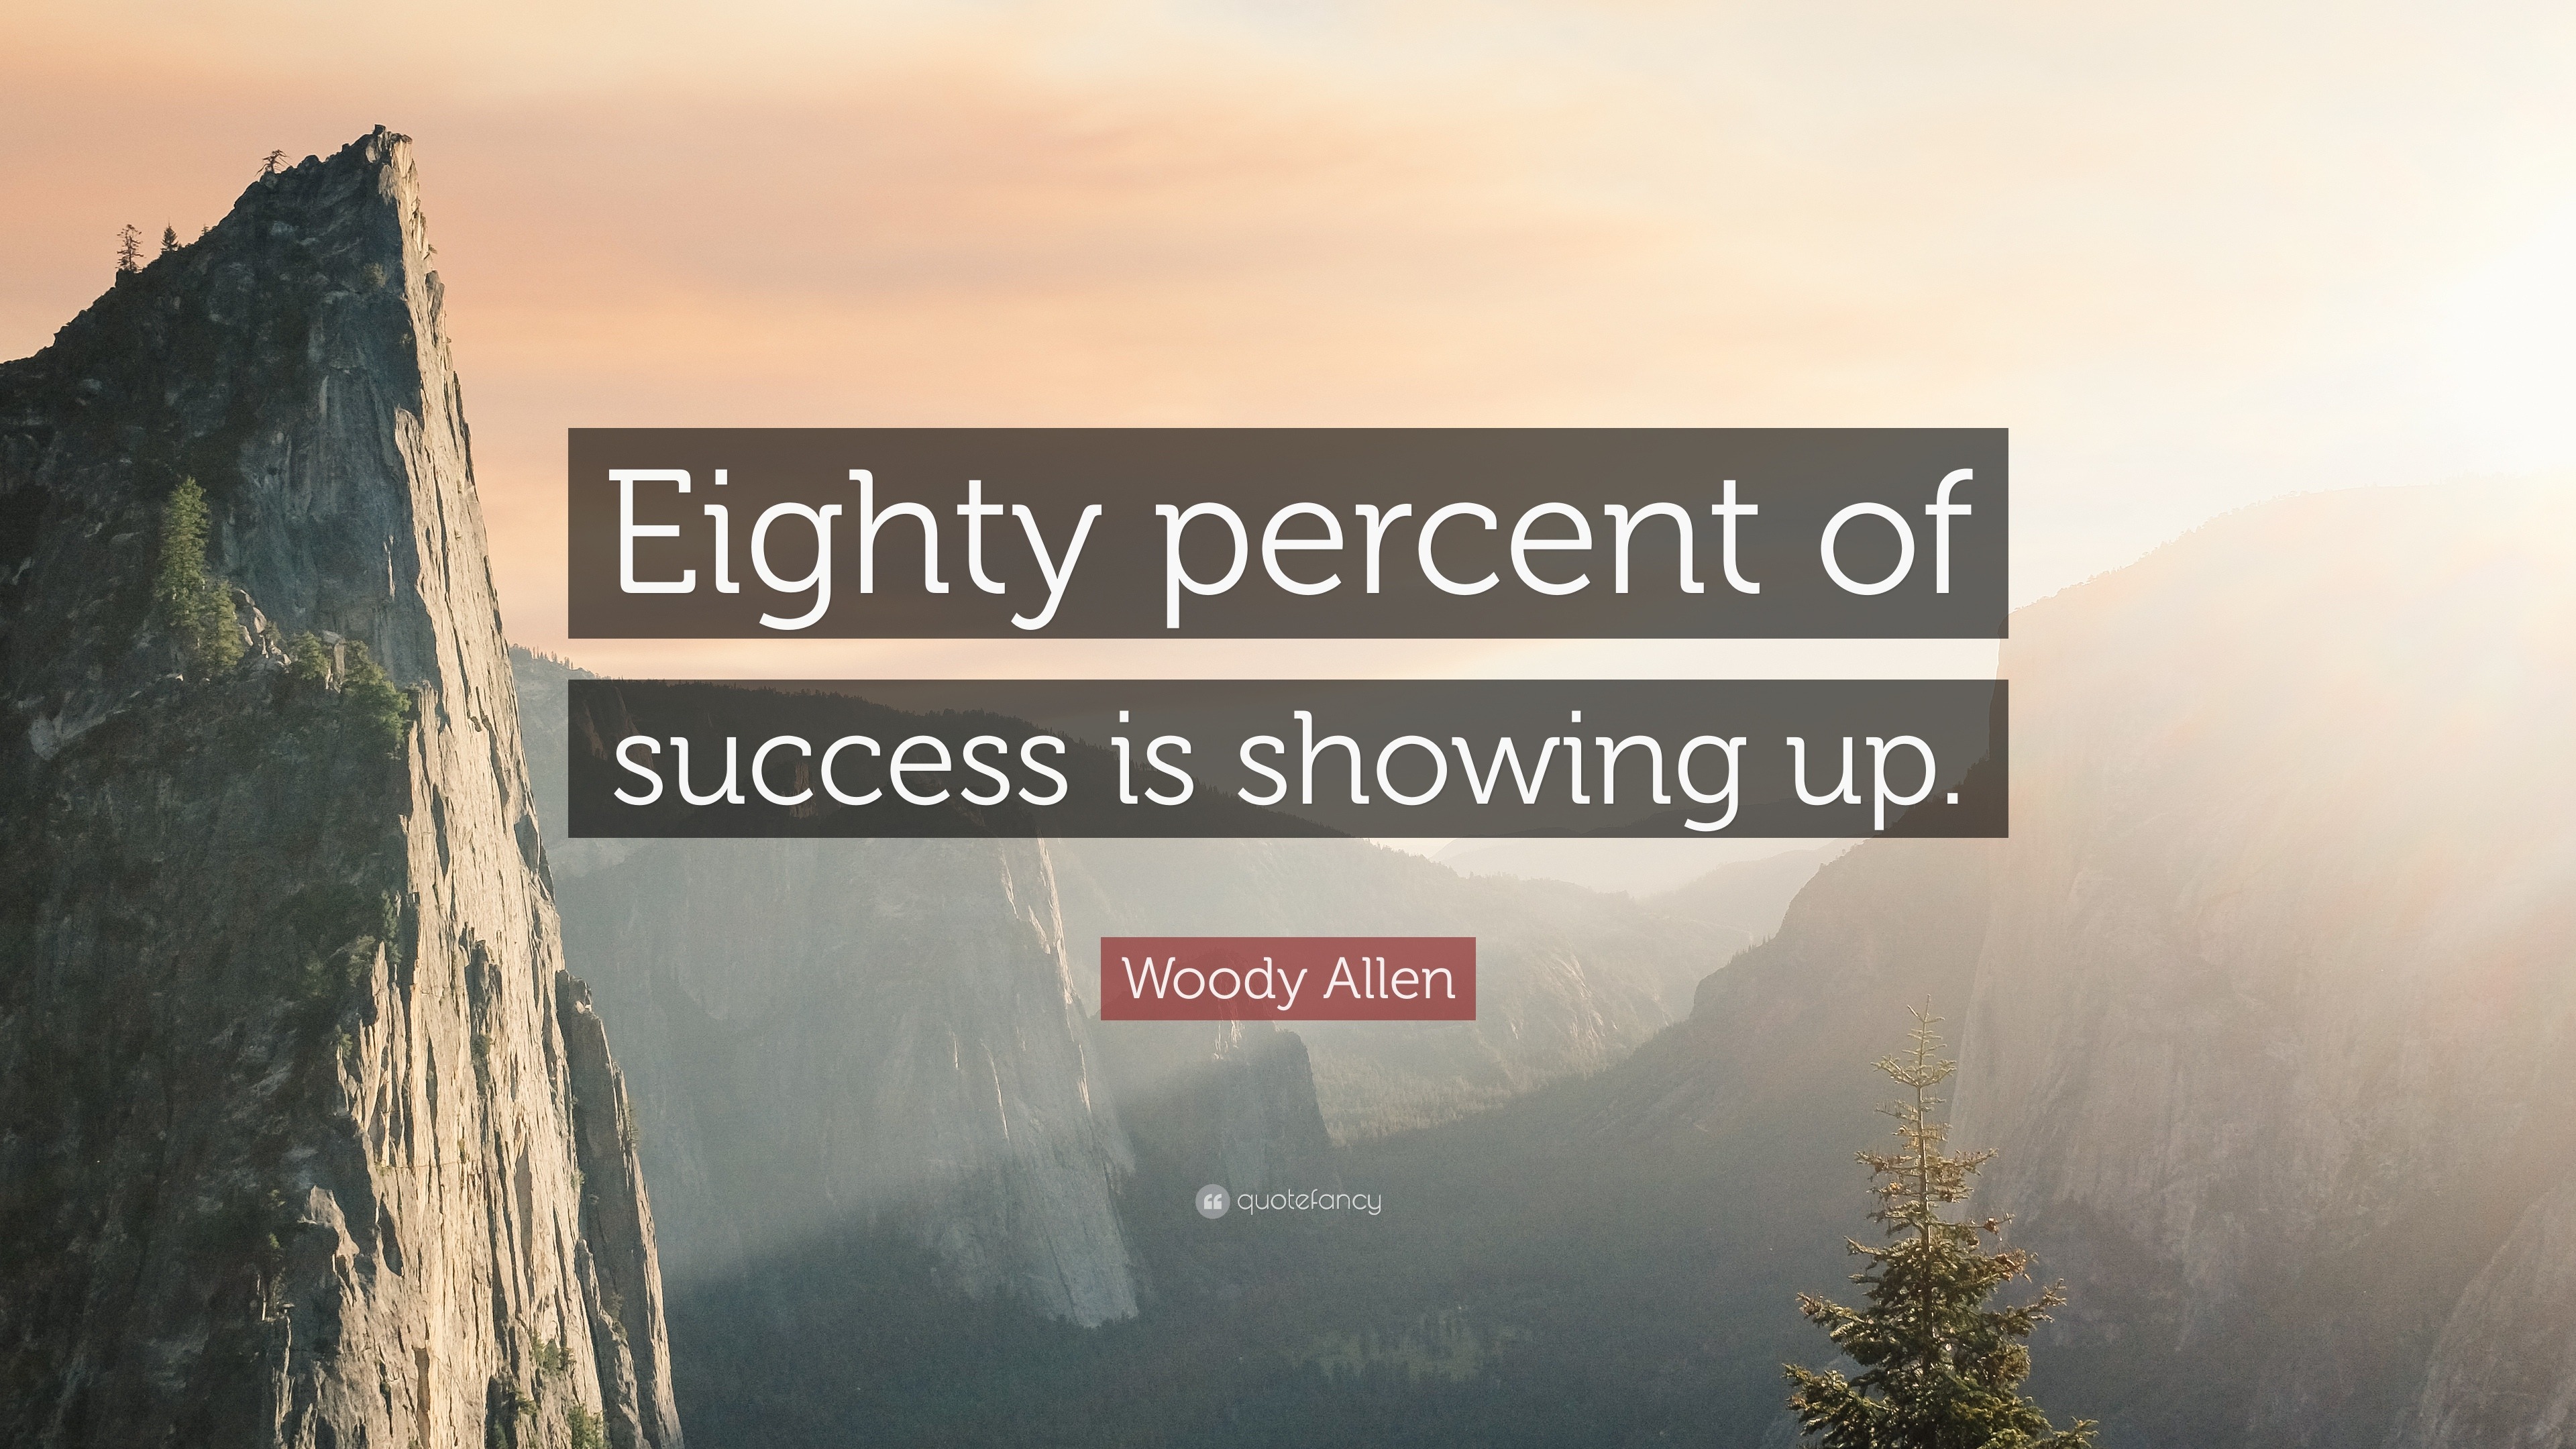 Woody Allen Quote “eighty Percent Of Success Is Showing Up” 23 Wallpapers Quotefancy 2800